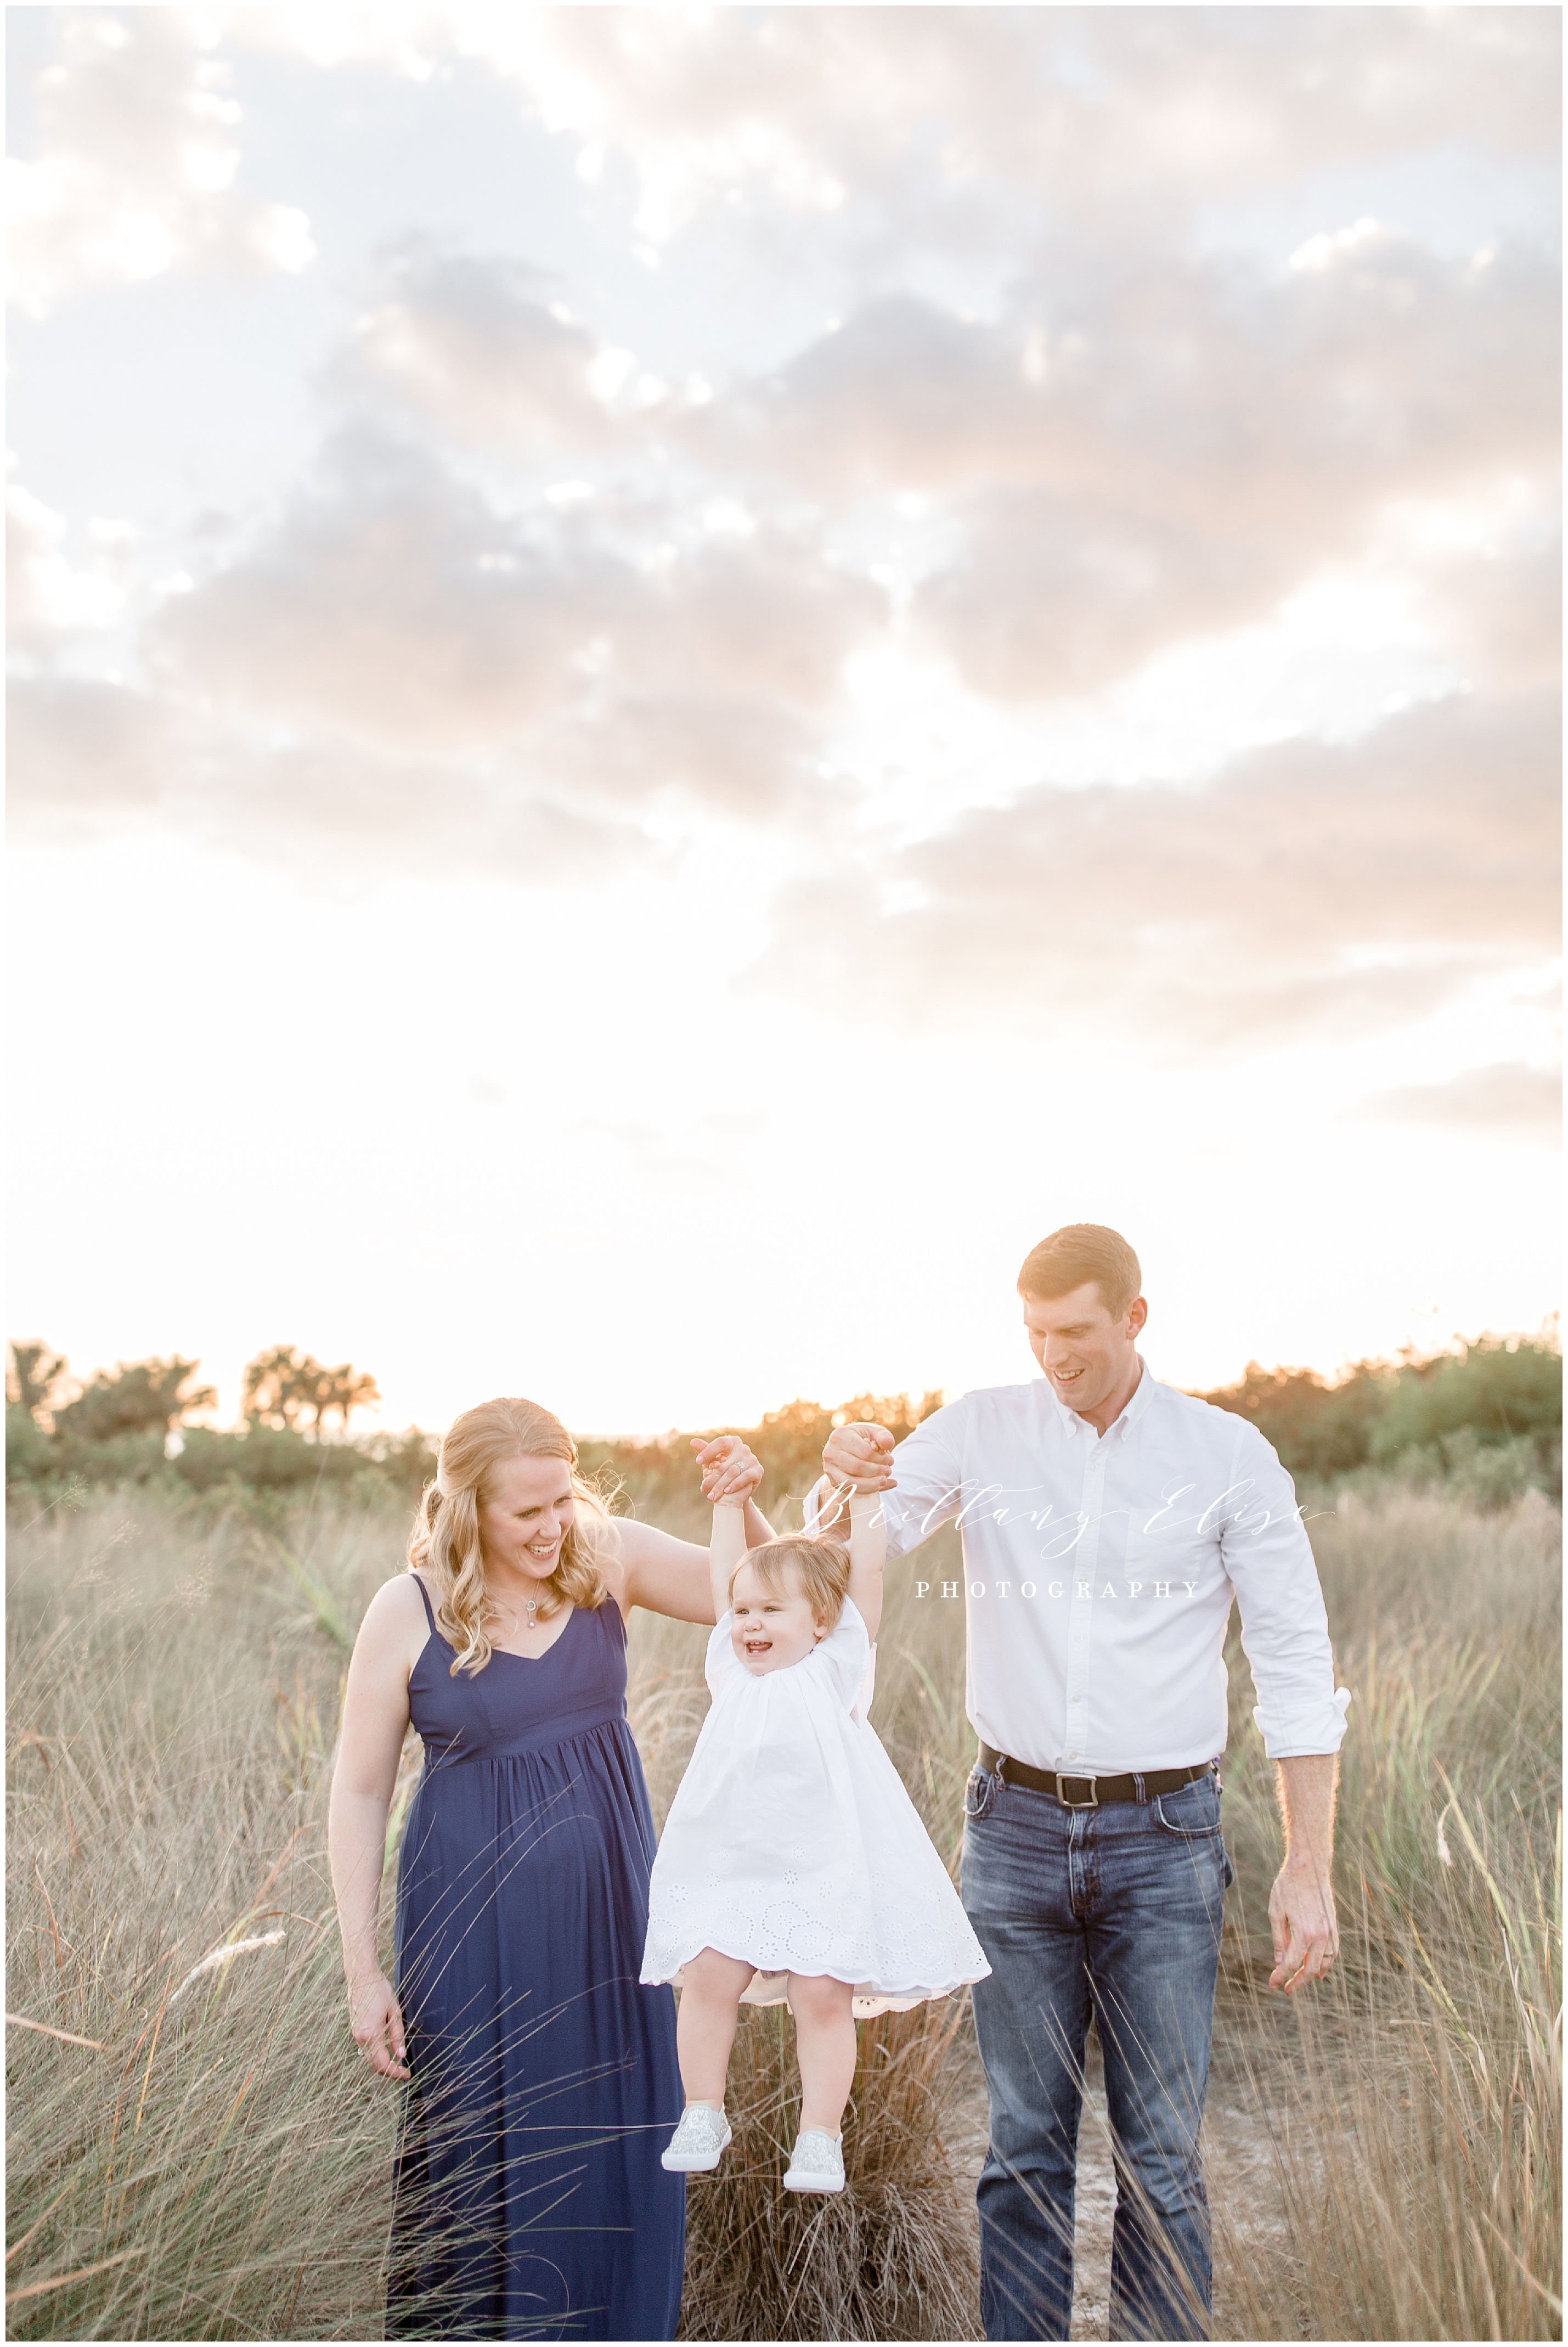 Tampa Extended Family Photographer